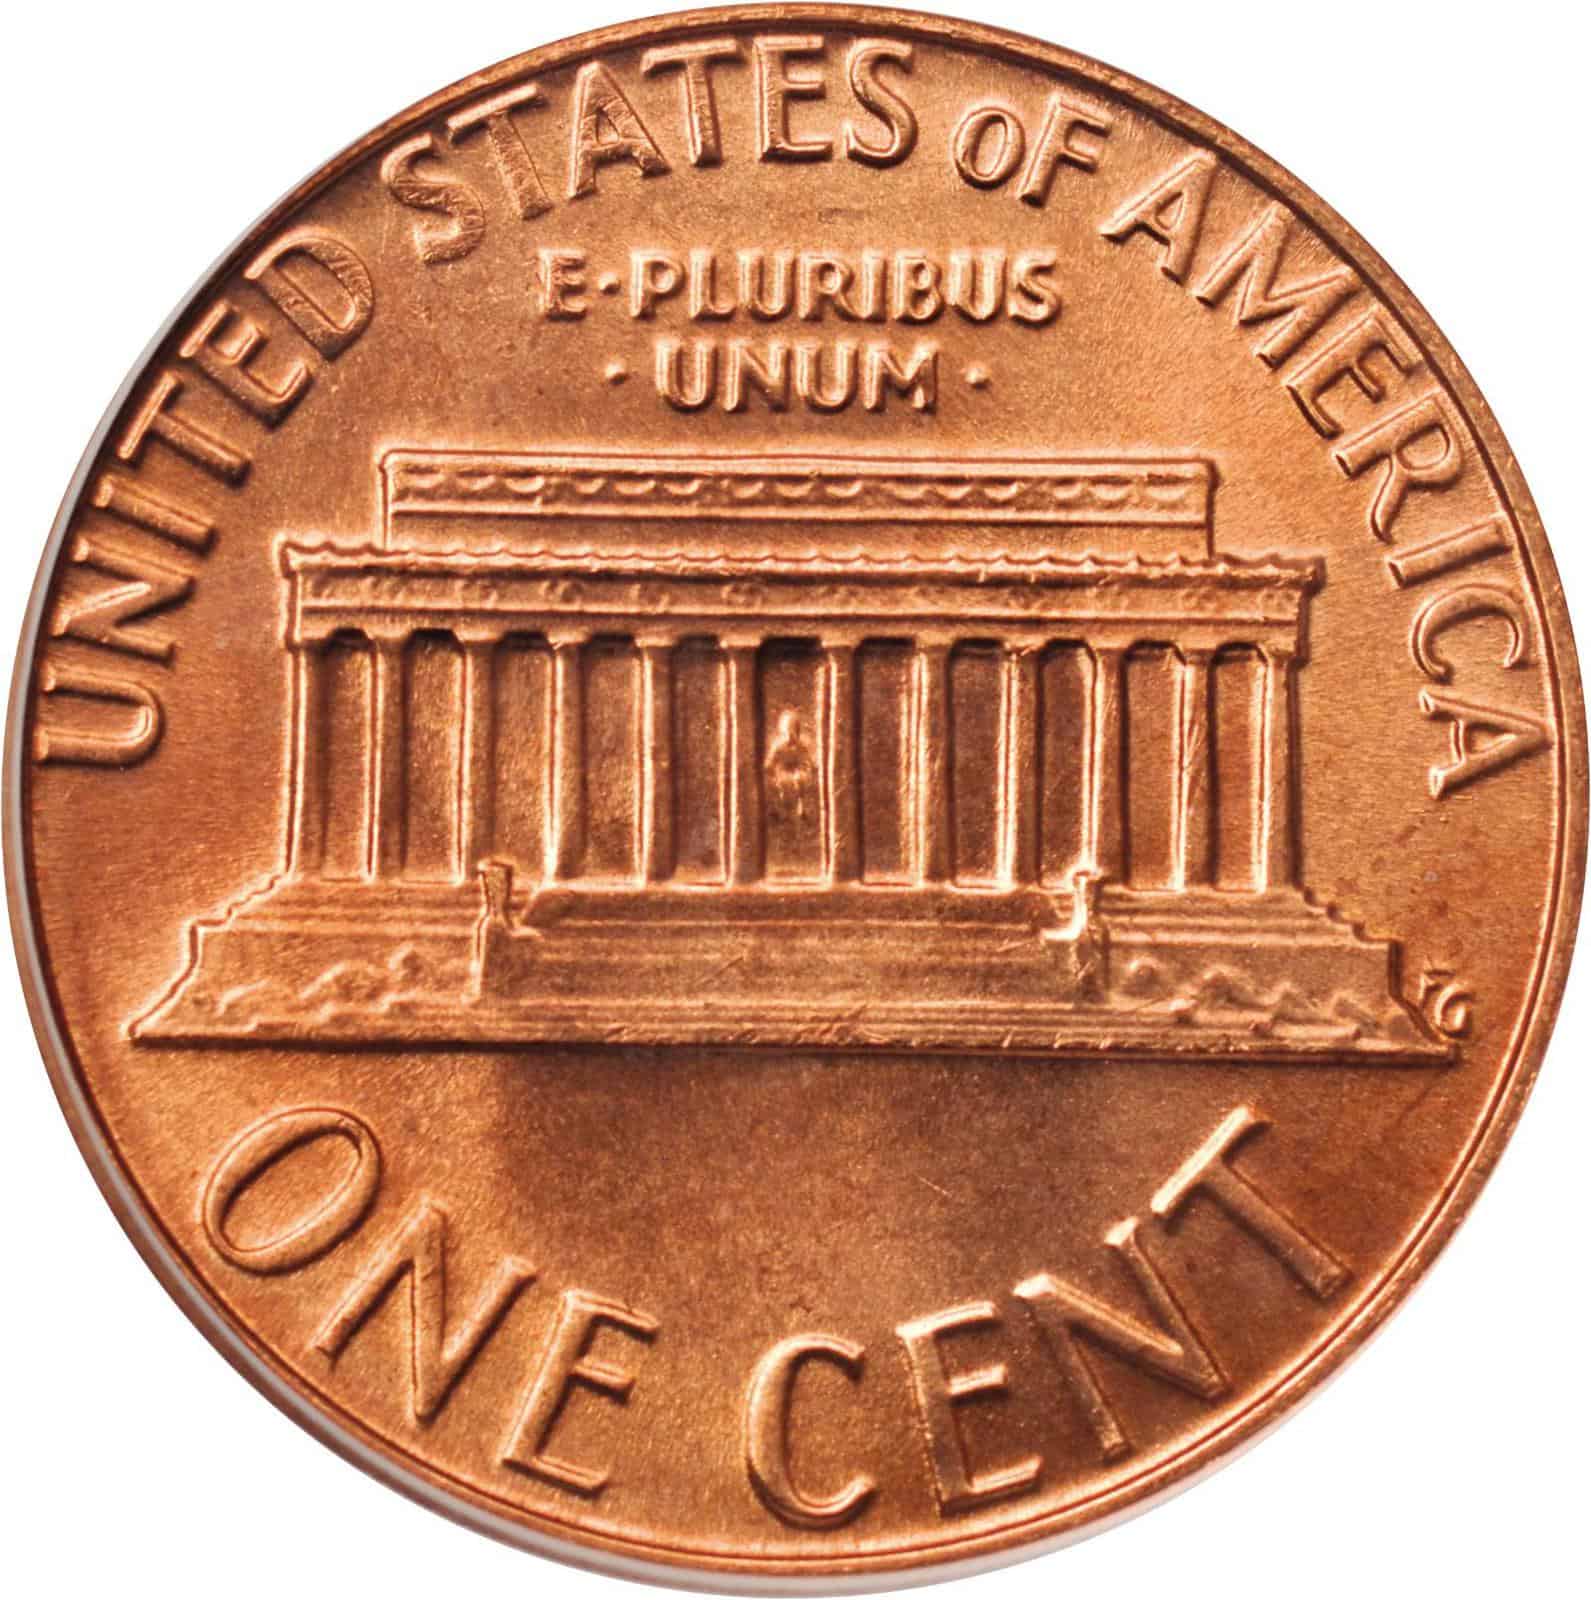 The Reverse of the 1980 Penny